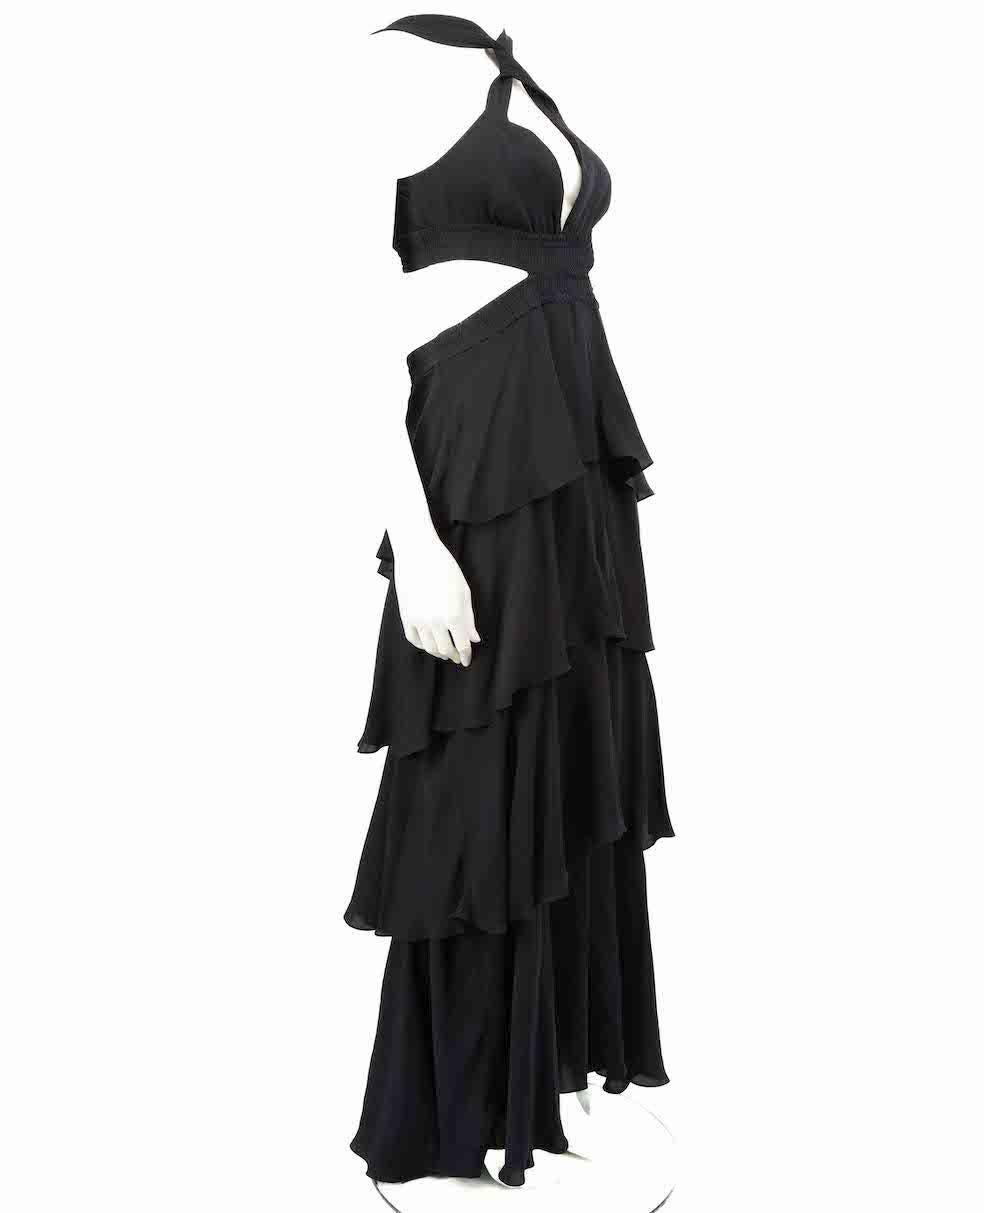 CONDITION is Very good. Hardly any visible wear to dress is evident on this used A.L.C. designer resale item.
 
 Details
 Black
 Silk
 Dress
 Maxi
 V-neck
 Sleeveless
 Waist cut-out
 Tiered skirt
 Side zip fastening
 
 
 Made in China
 
